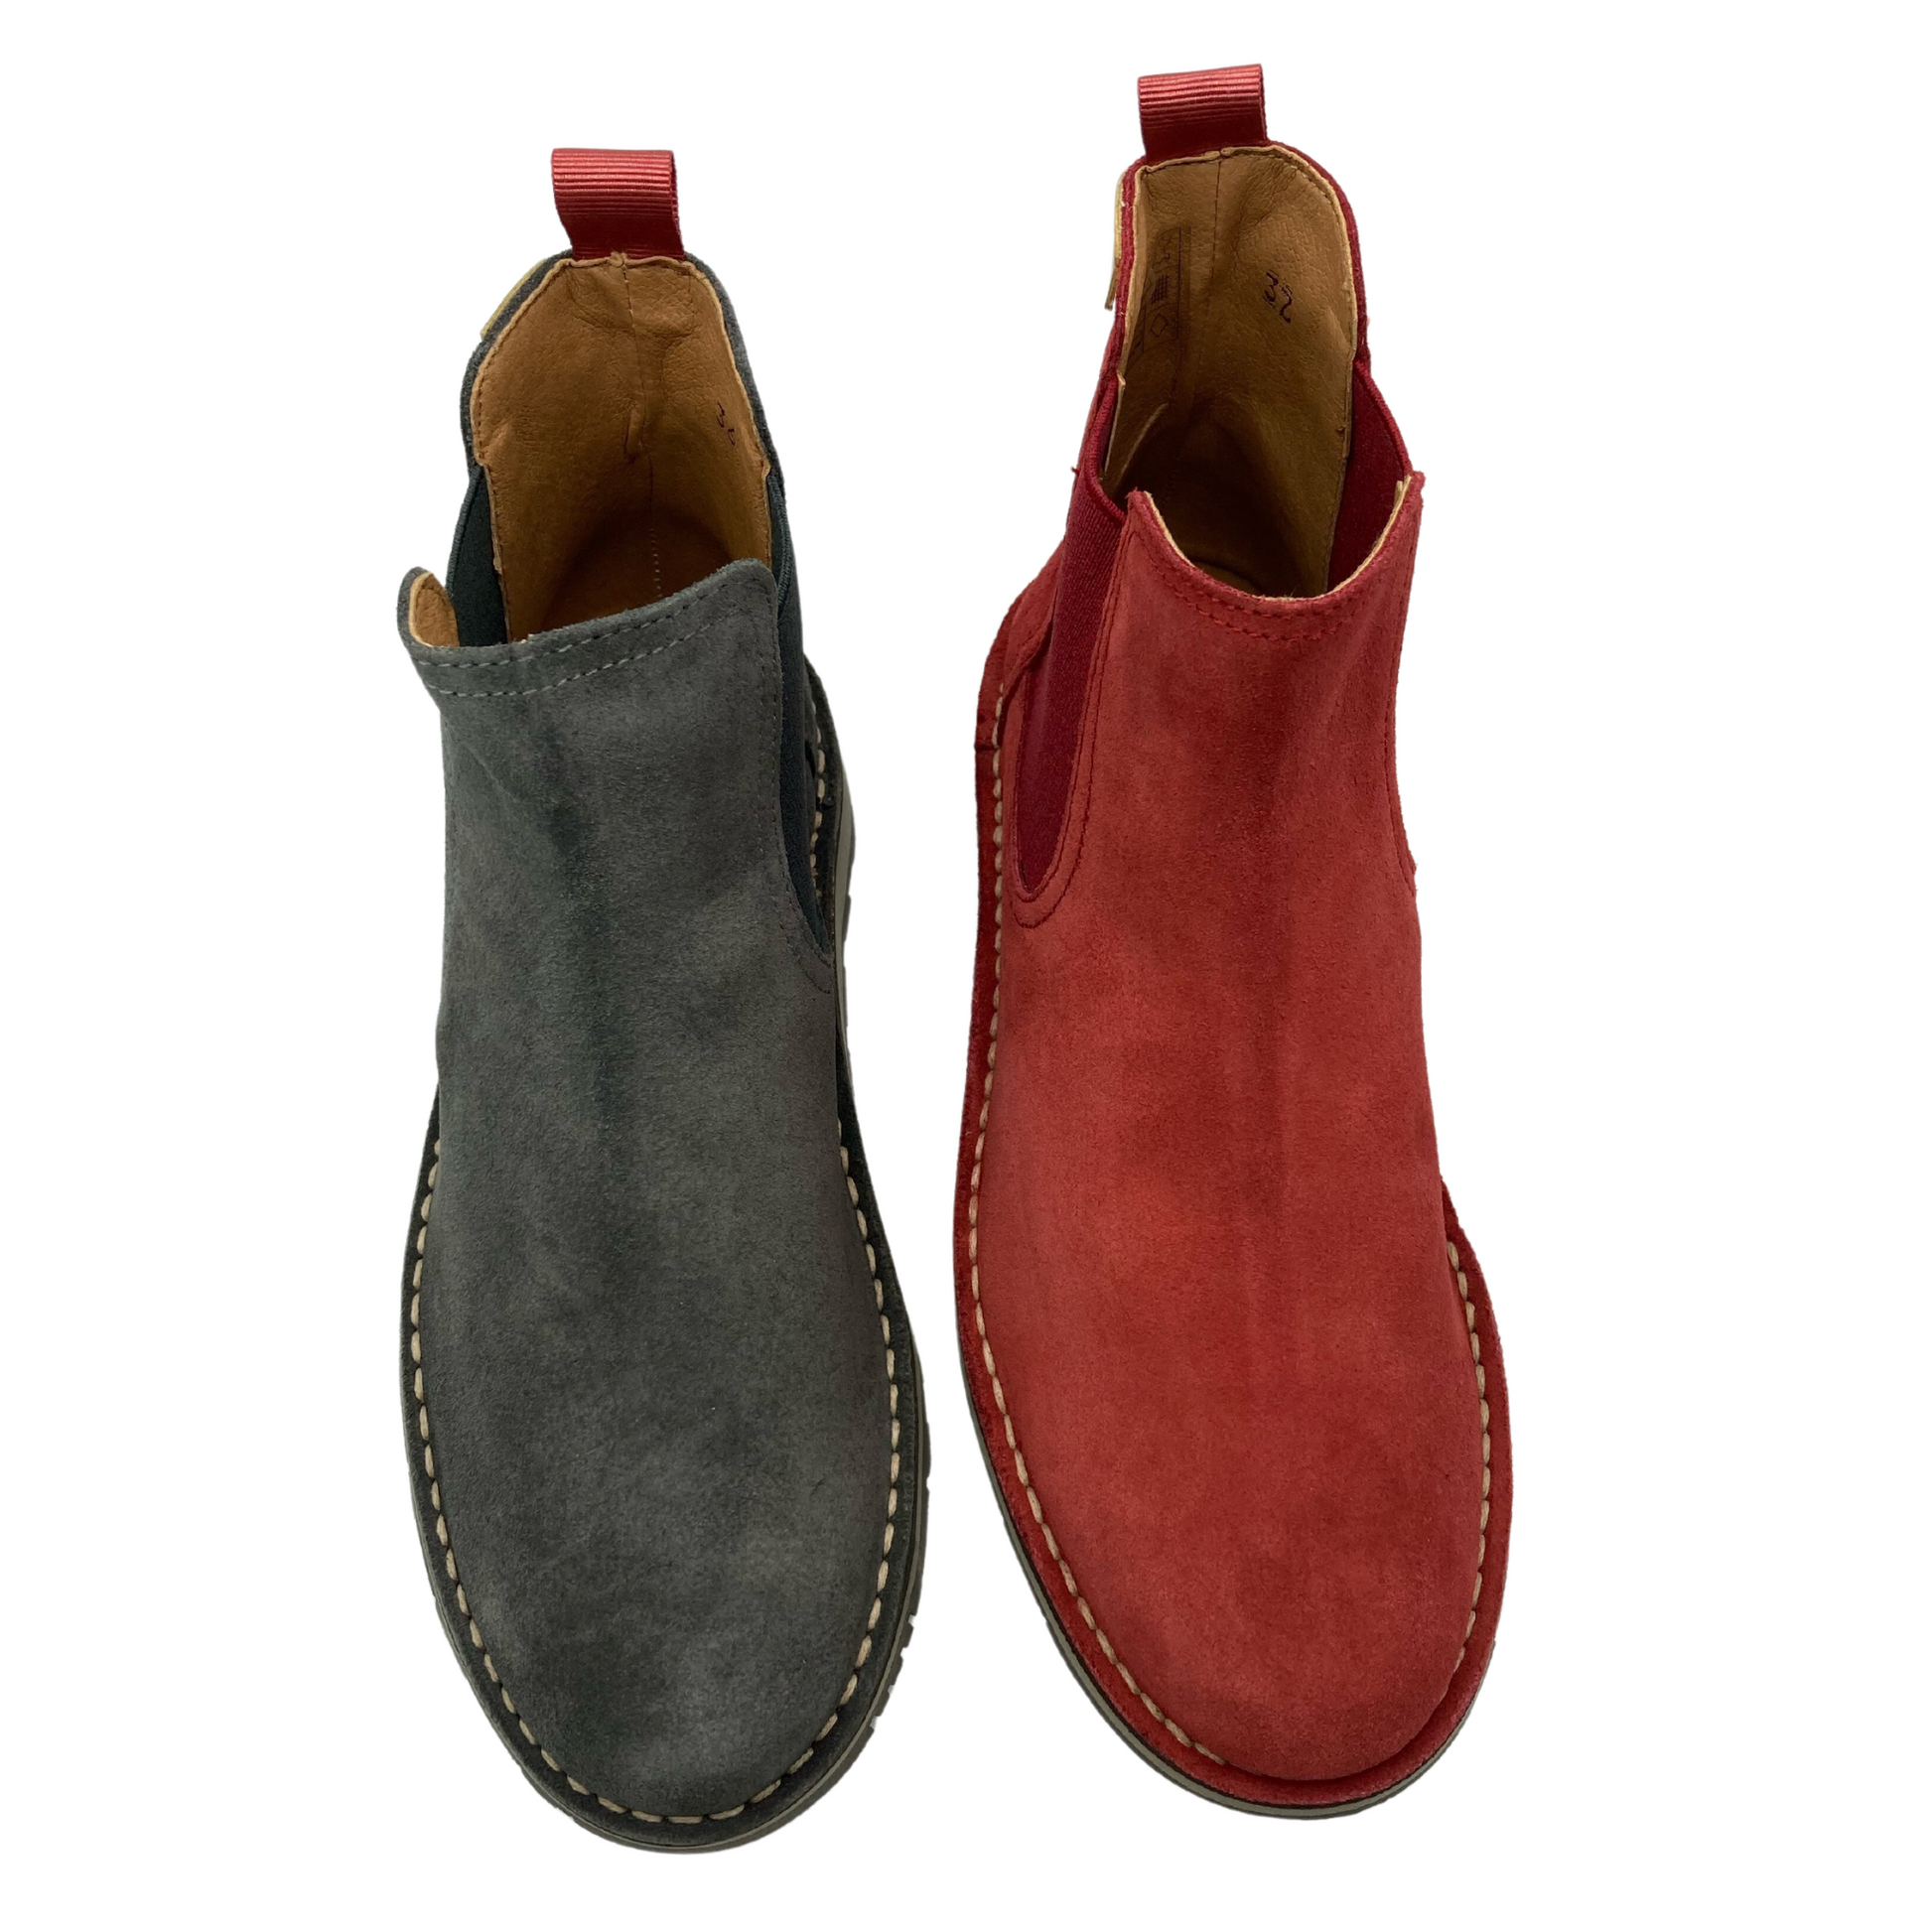 View of one grey boot and one red boot side by side. Both are leather with a rounded toe and red pull on tab.